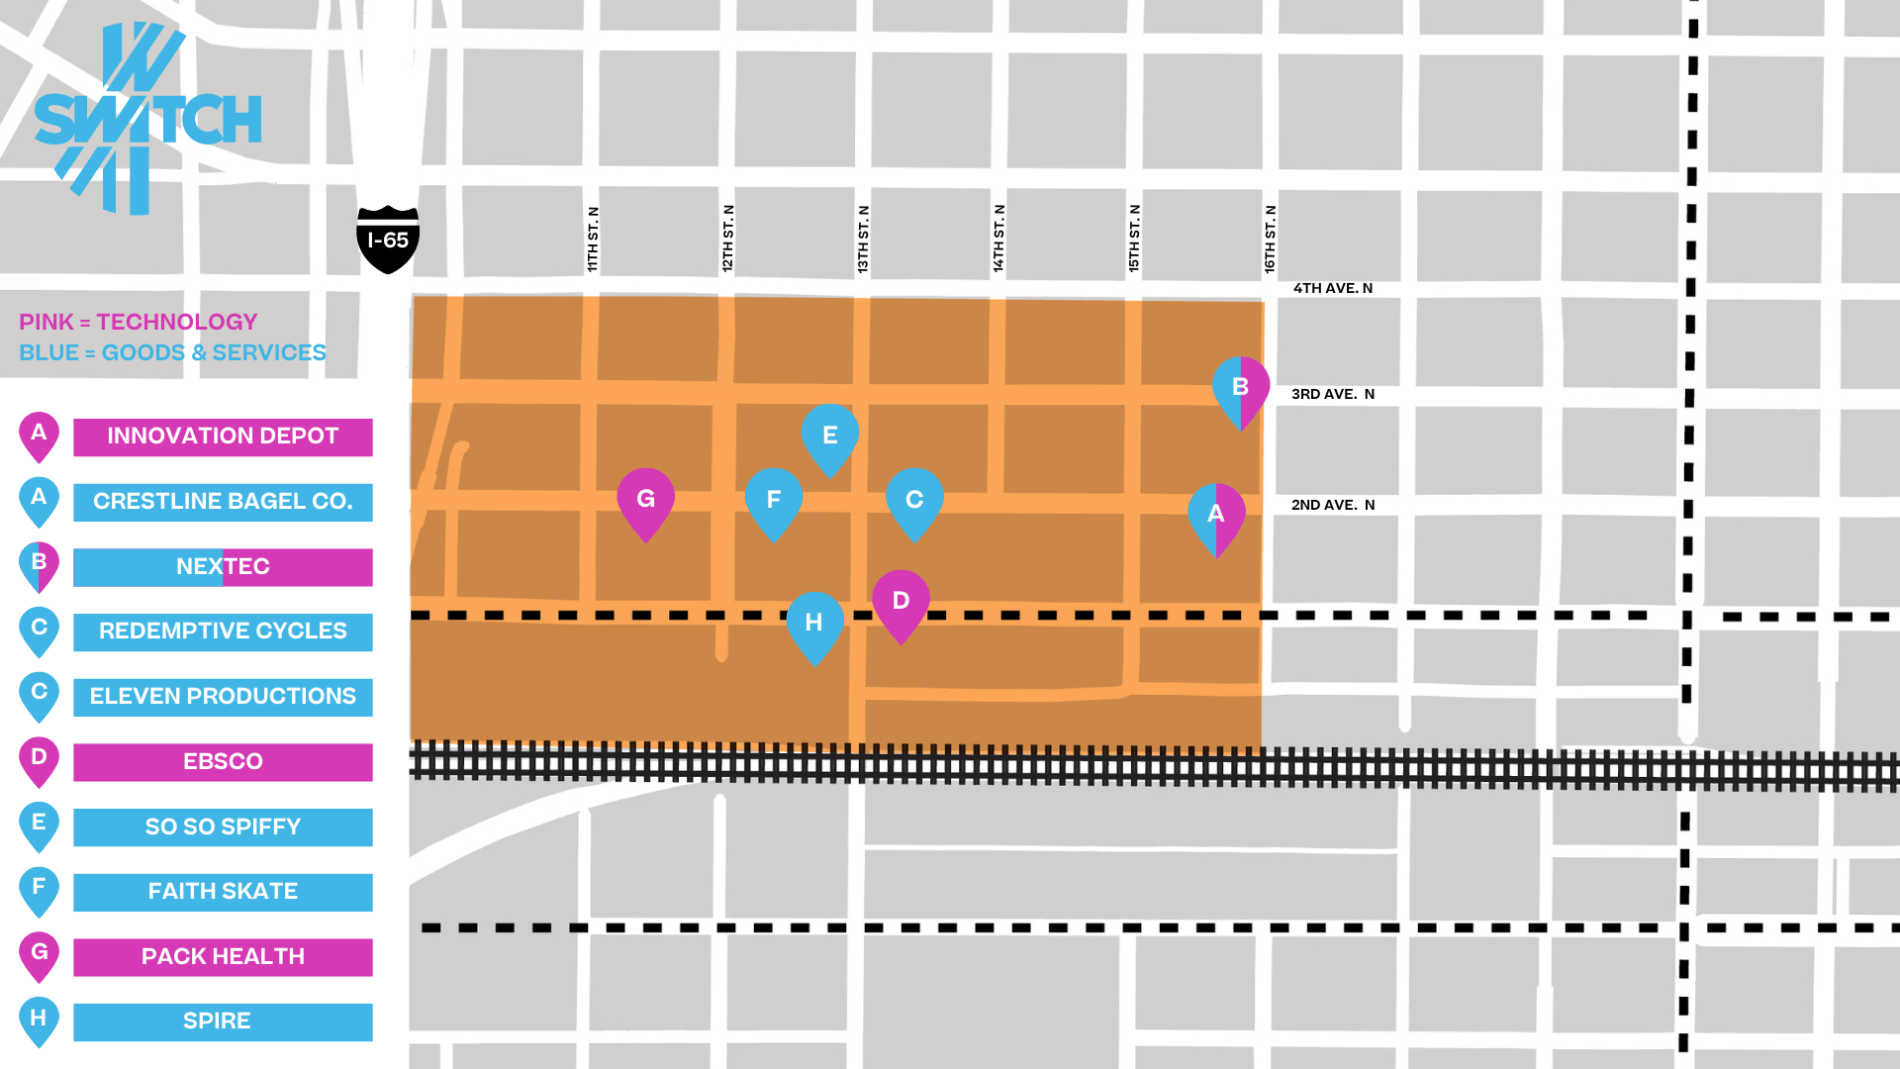 Map of The Switch district including technology-focused businesses and goods and services providers